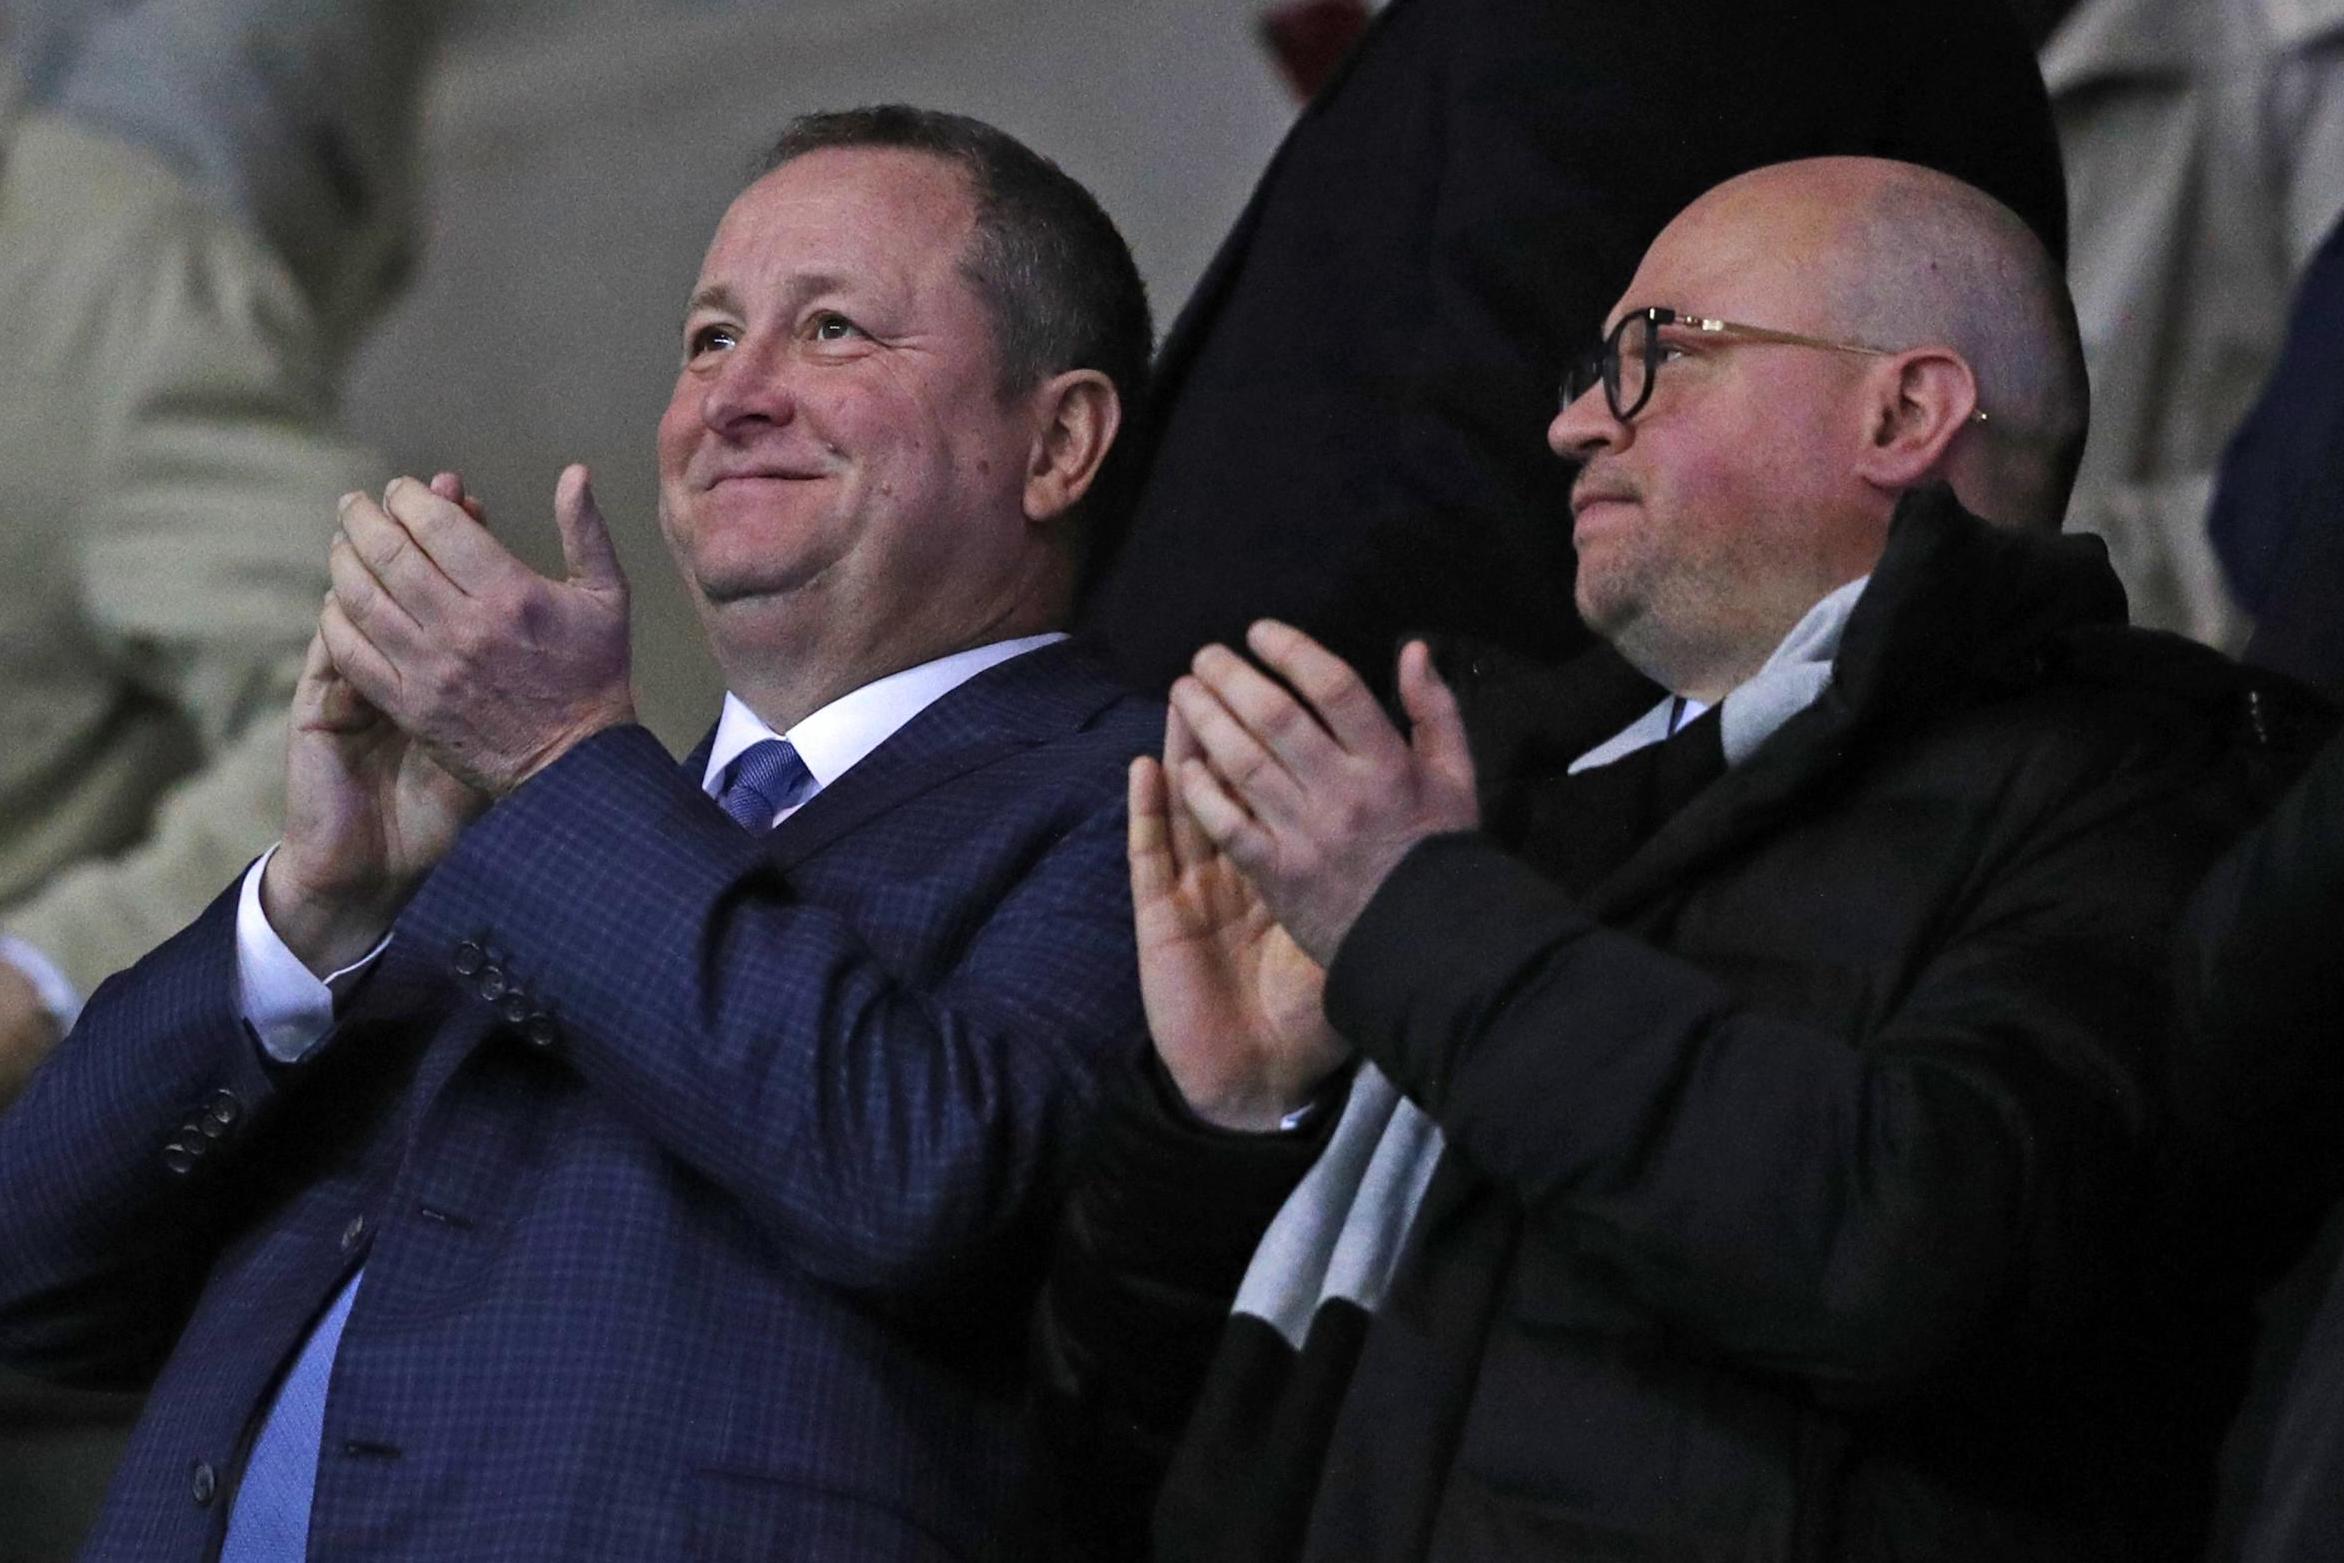 Mike Ashley is reported to have lost an estimated £800m in financial fractures caused by Covid-19